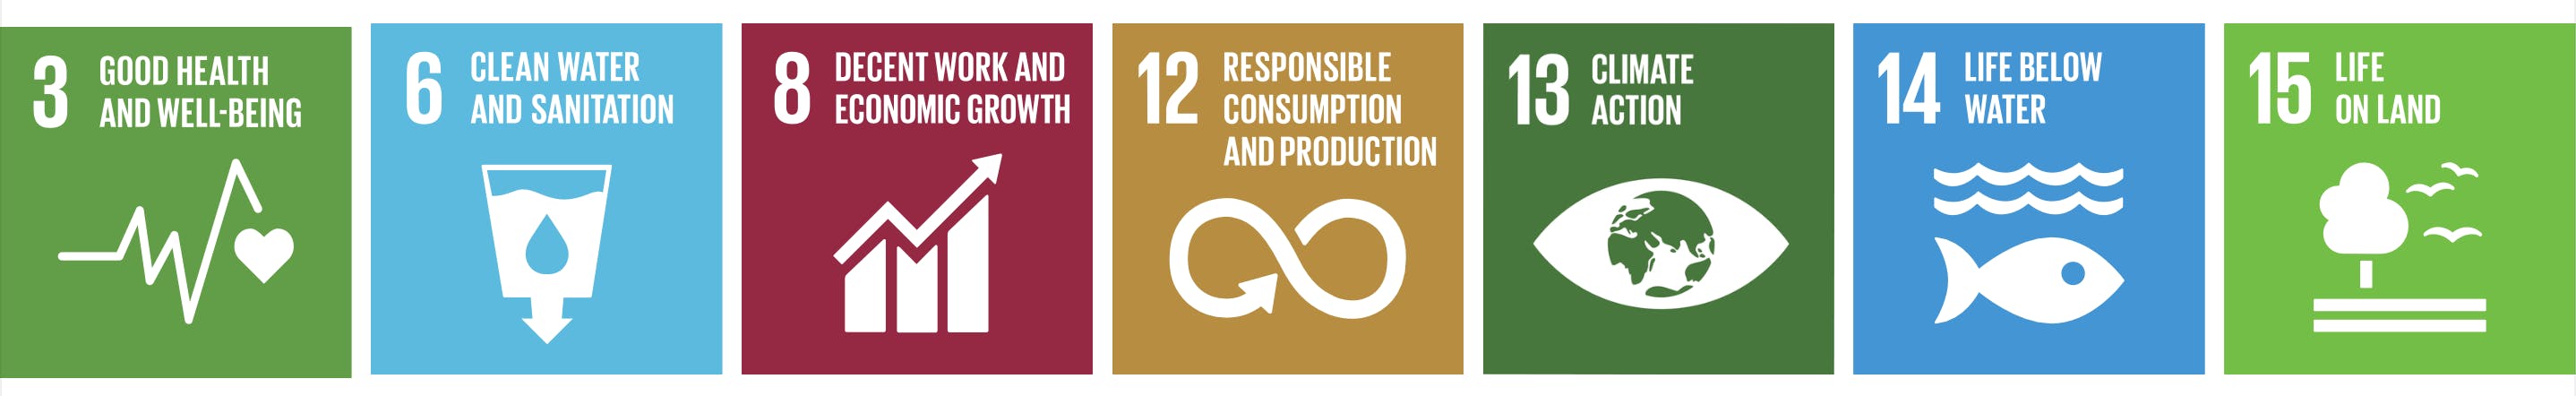 The icons of the Sustainable Development Goals Number 3, 6, 8 , 12, 13, 14, 154